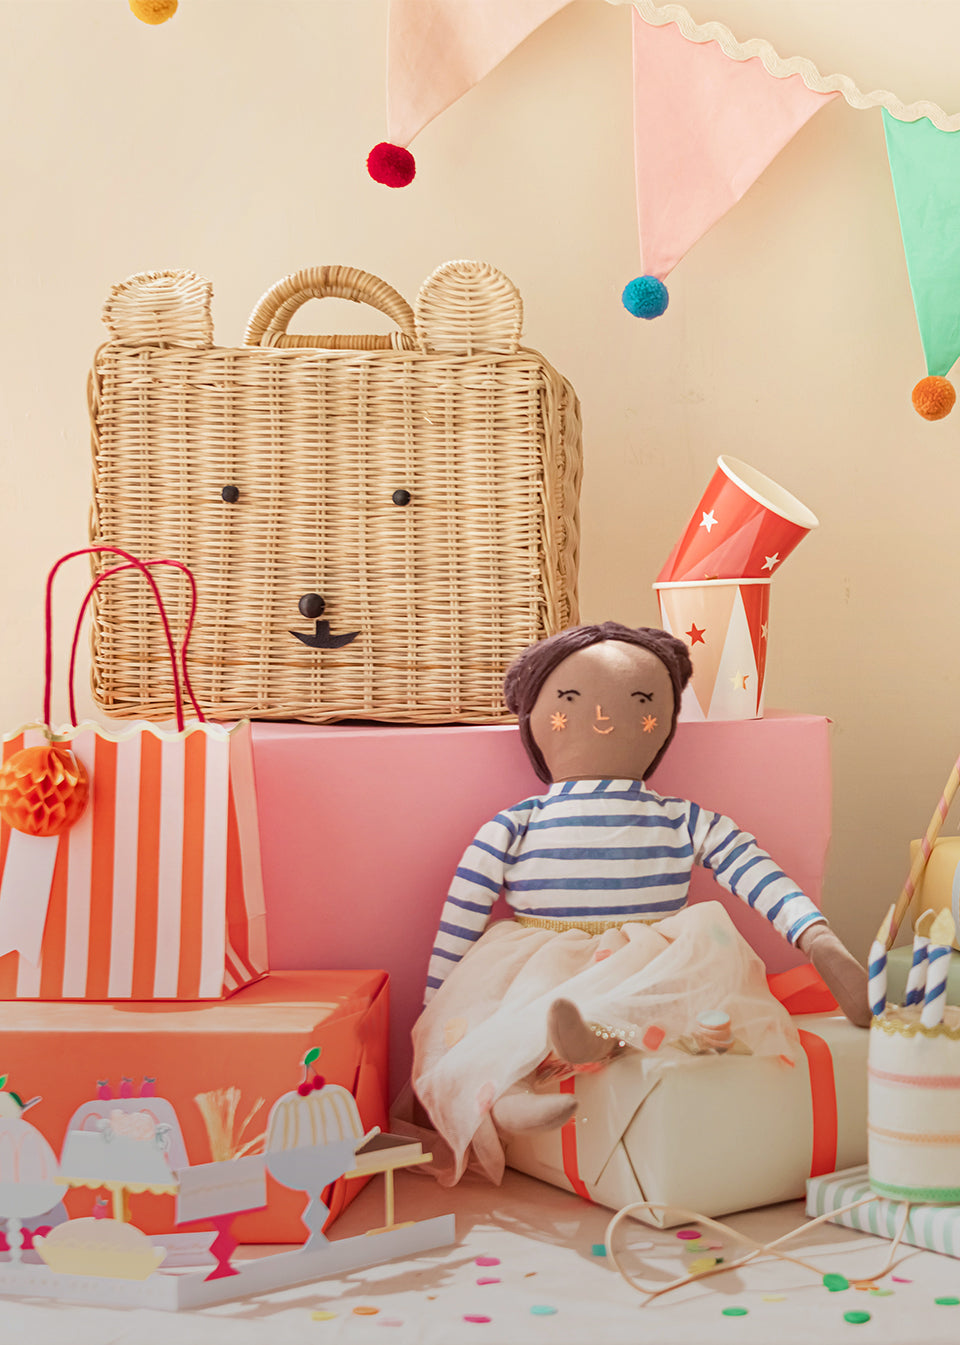 Amid rainbow confetti, a variety of gifts, including a doll, basket, gift bag, and birthday partyware.